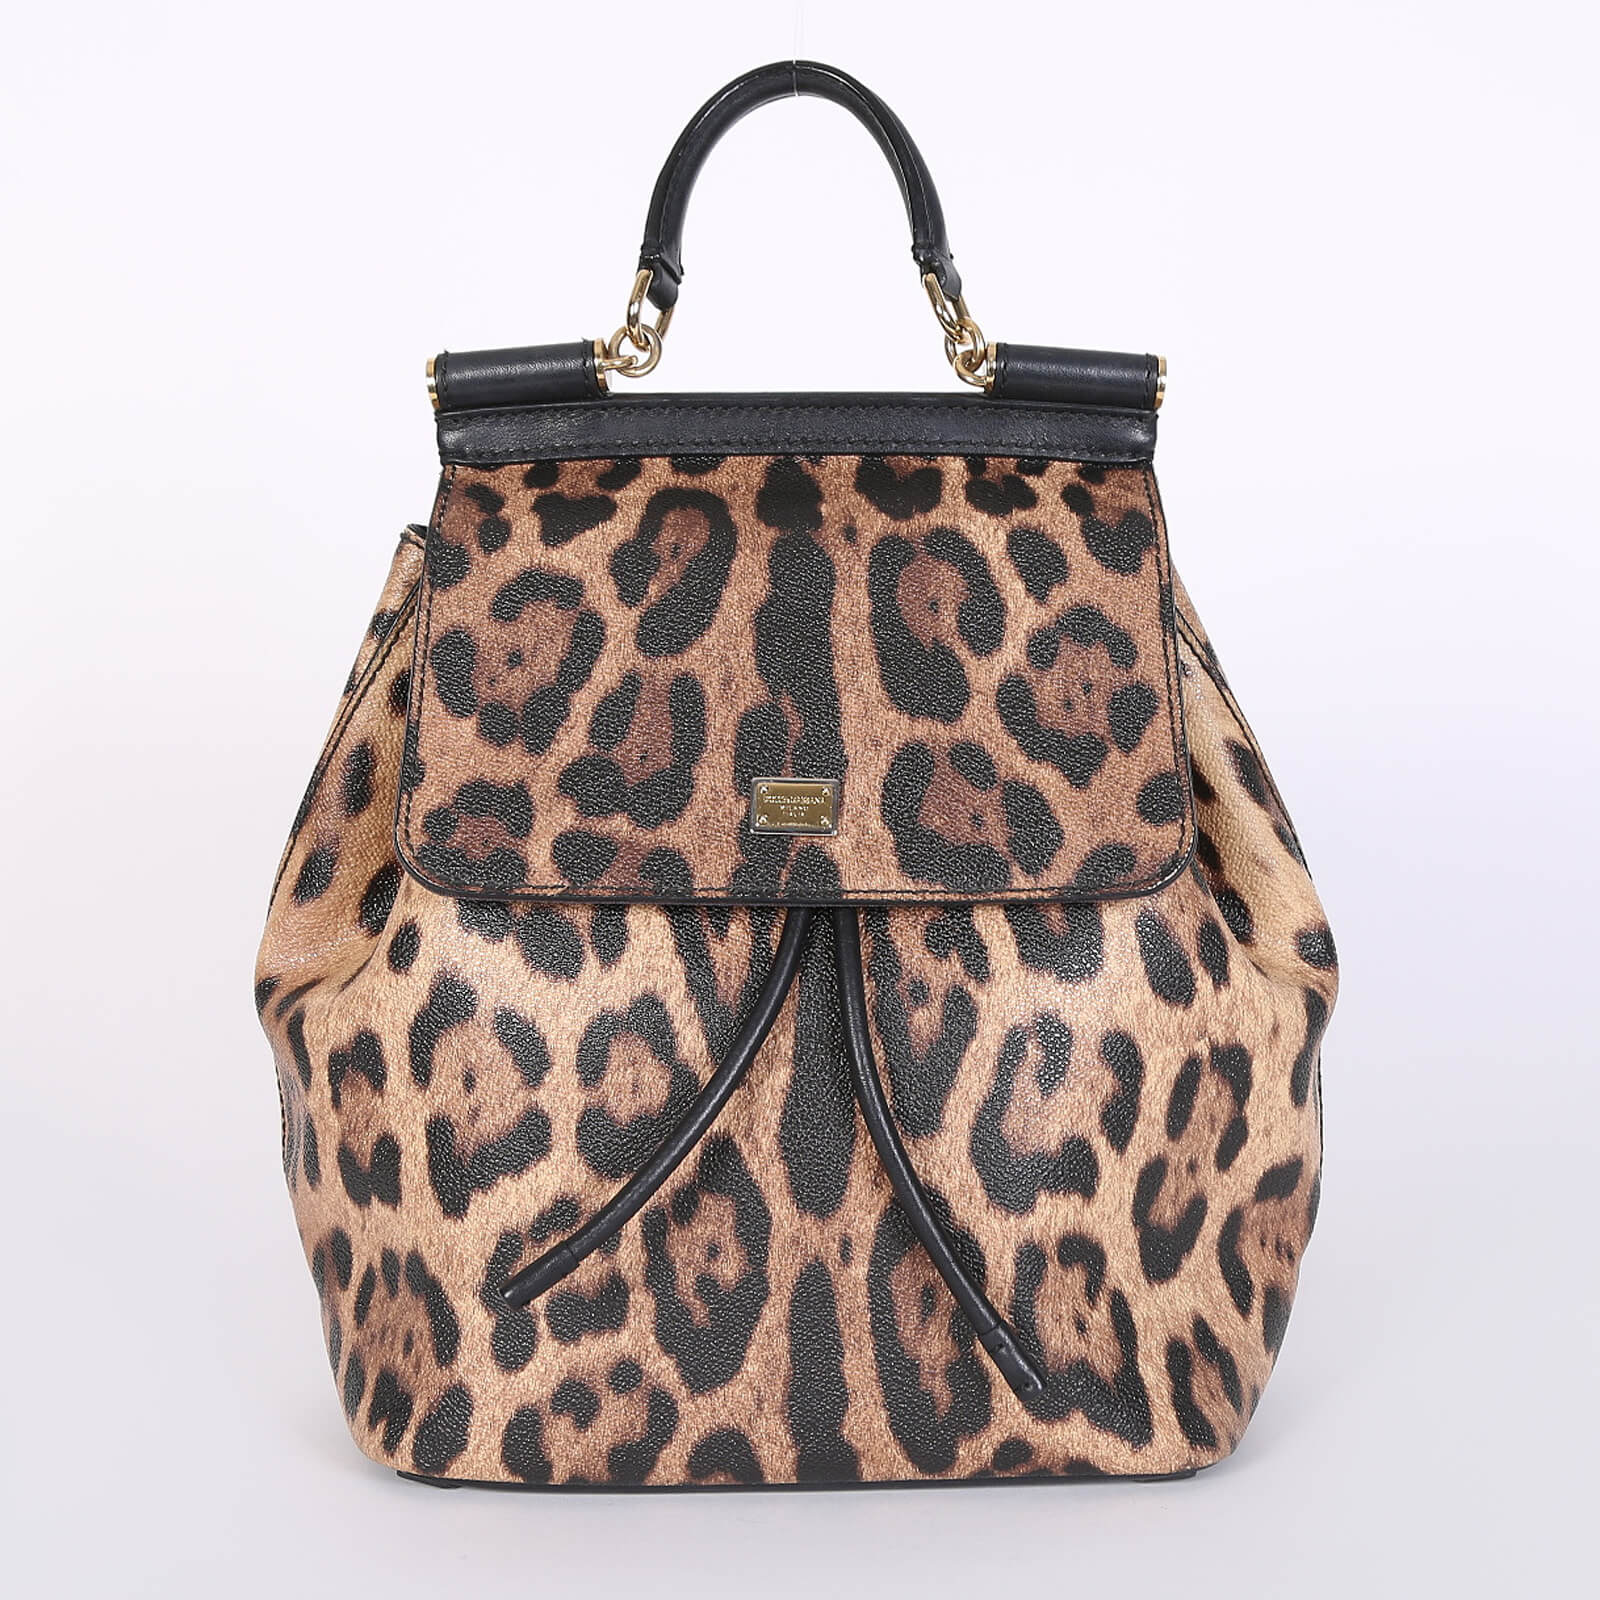 Dolce & Gabbana - Sicily Leopard Print Coated Canvas Leather